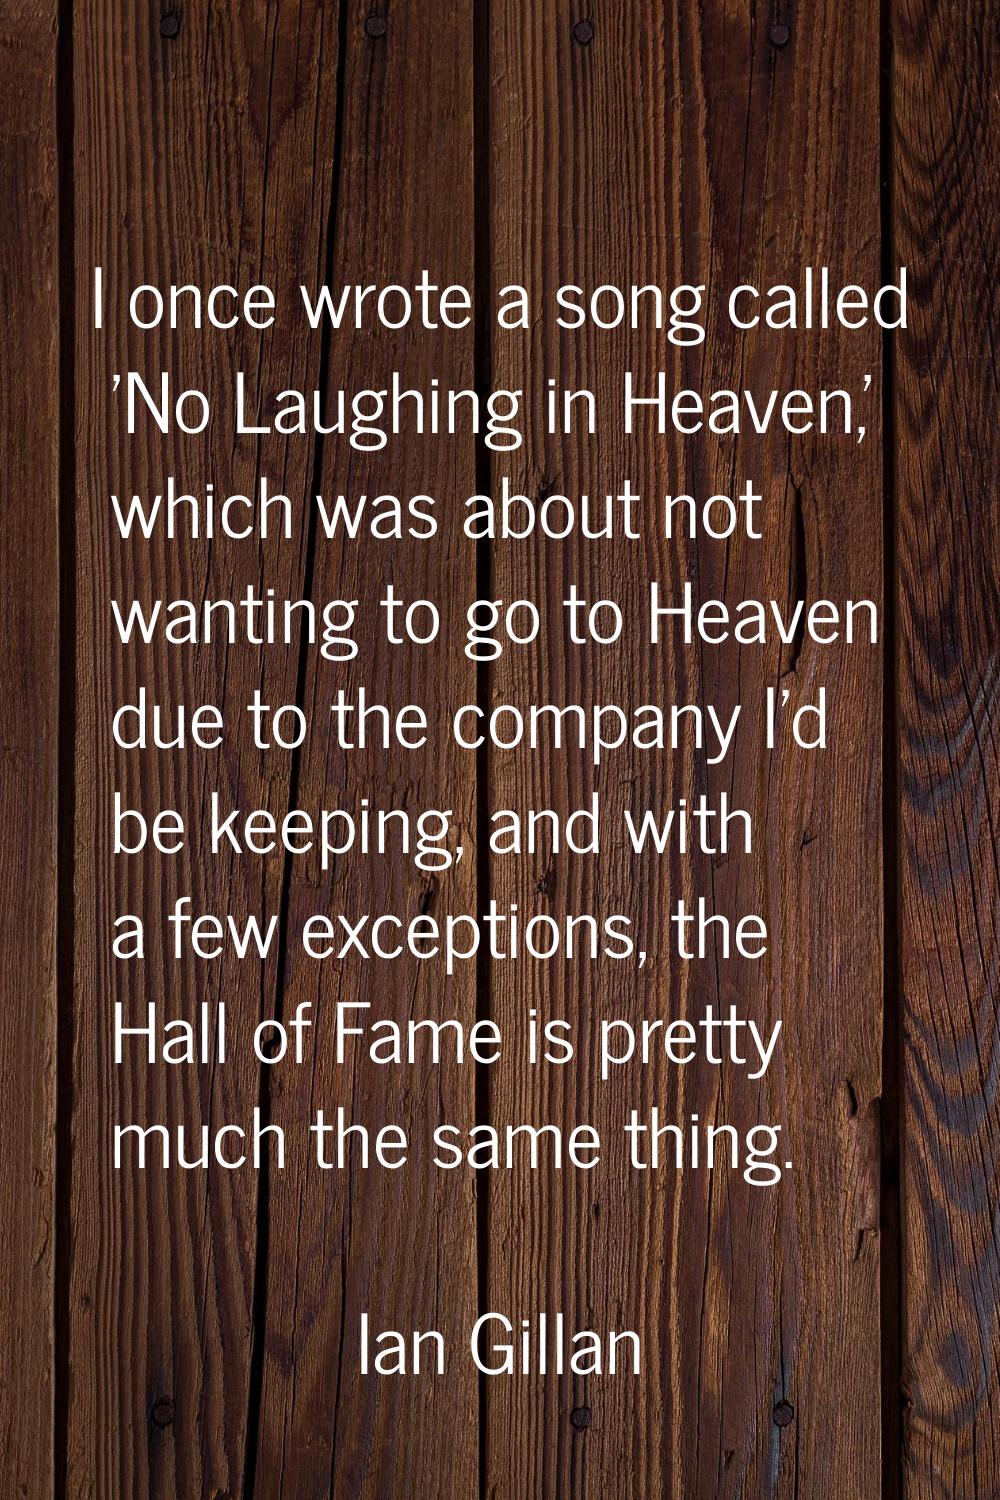 I once wrote a song called 'No Laughing in Heaven,' which was about not wanting to go to Heaven due